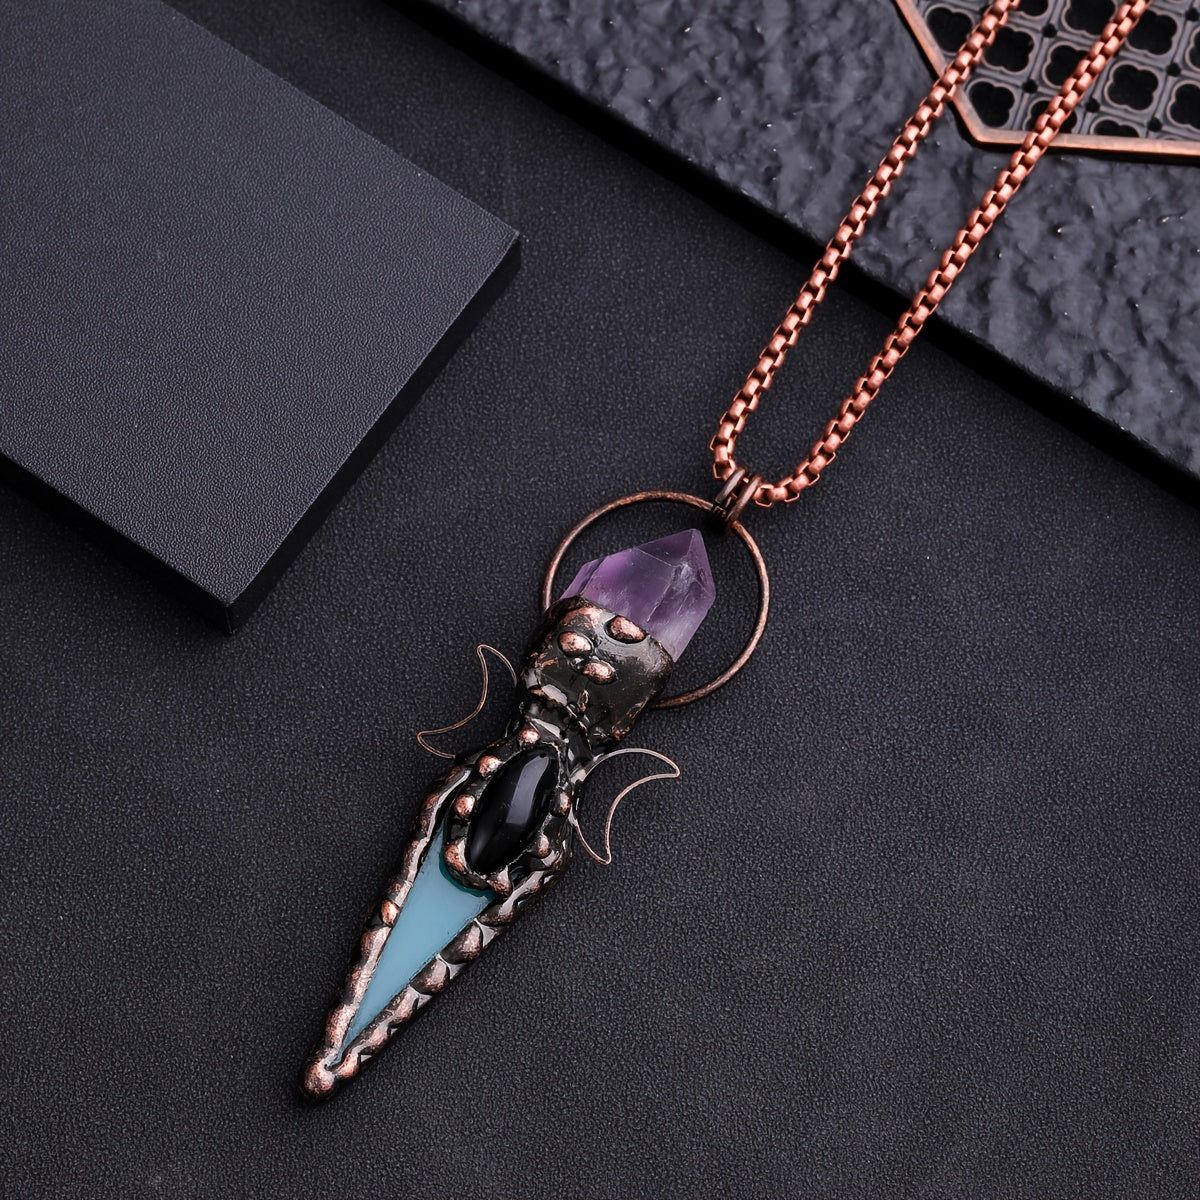 Witches Protection Arrow necklace